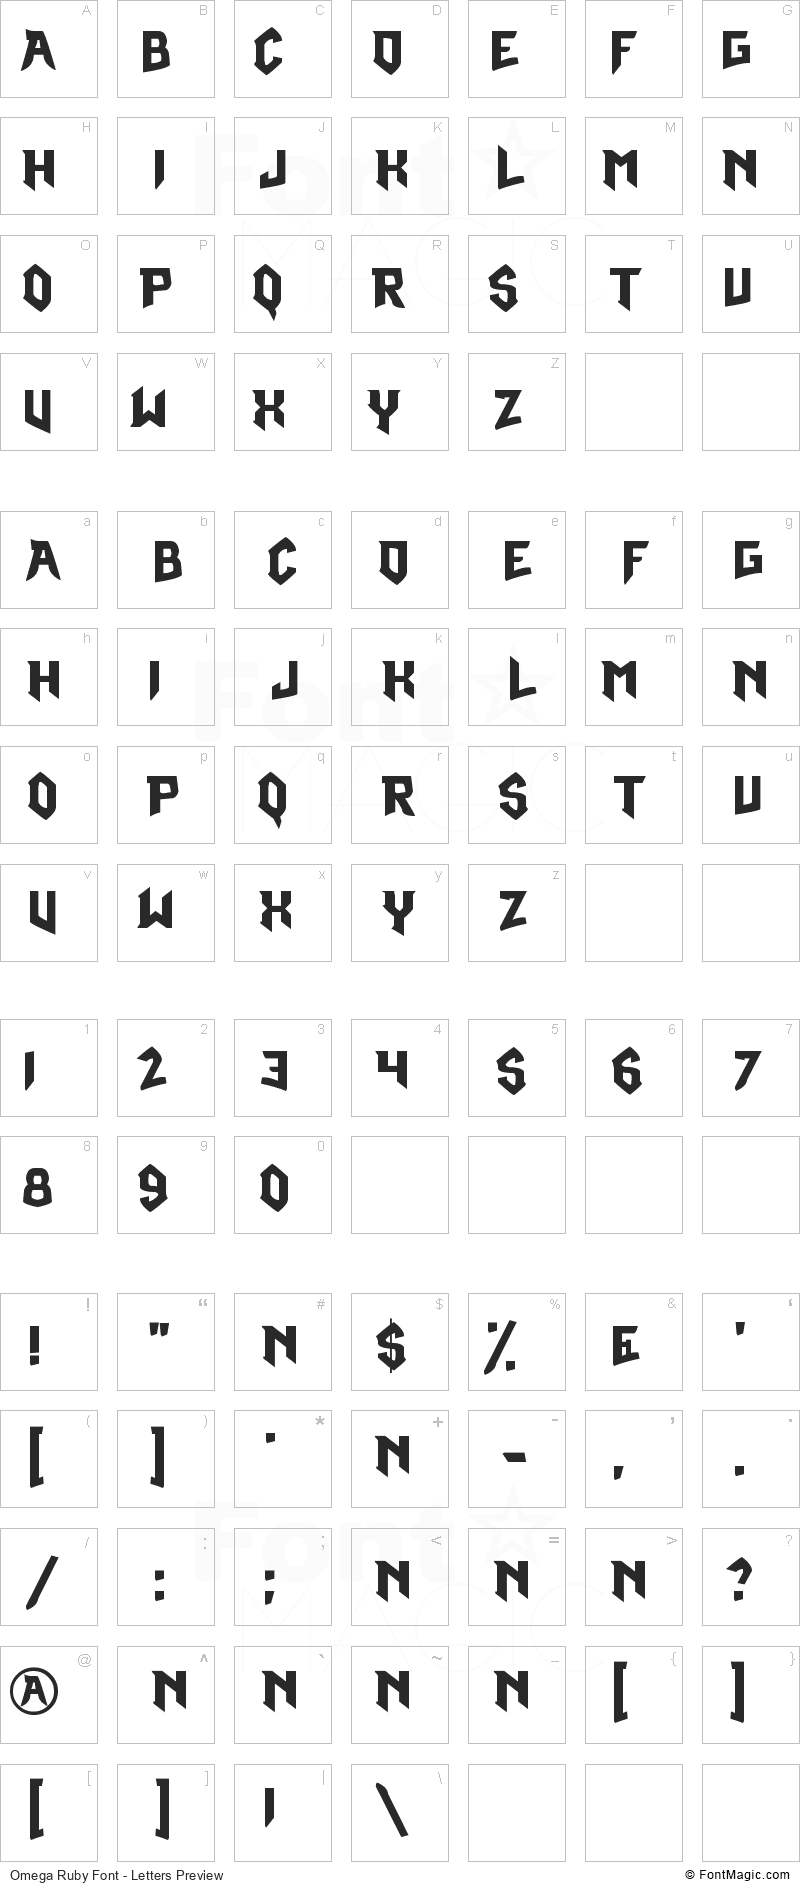 Omega Ruby Font - All Latters Preview Chart